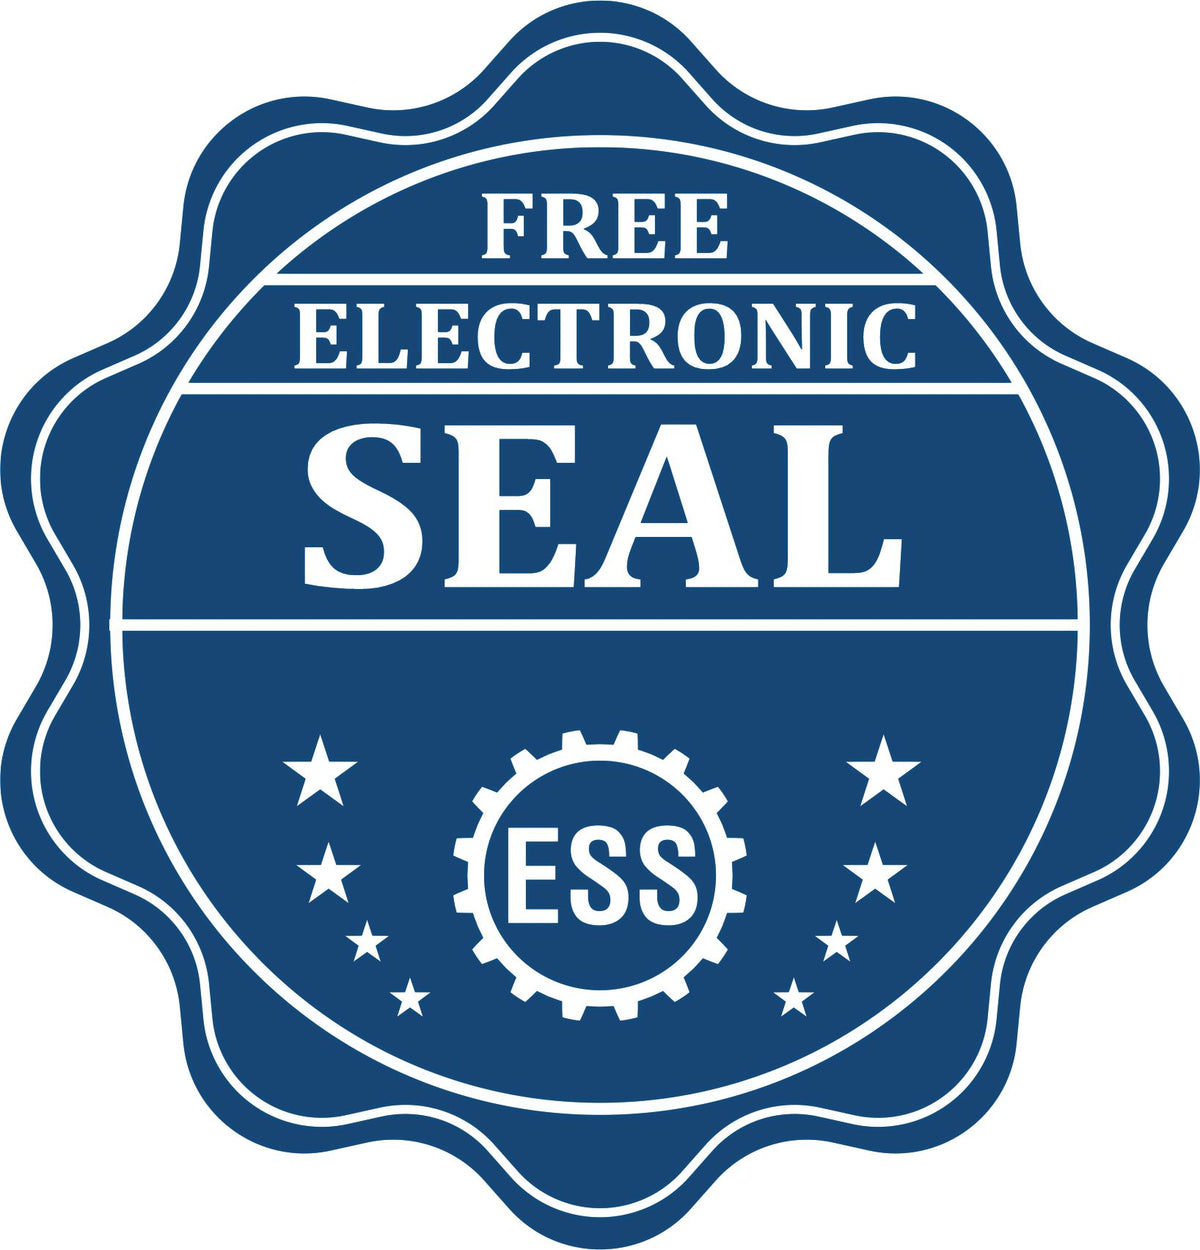 A badge showing a free electronic seal for the Gift New Hampshire Land Surveyor Seal with stars and the ESS gear on the emblem.